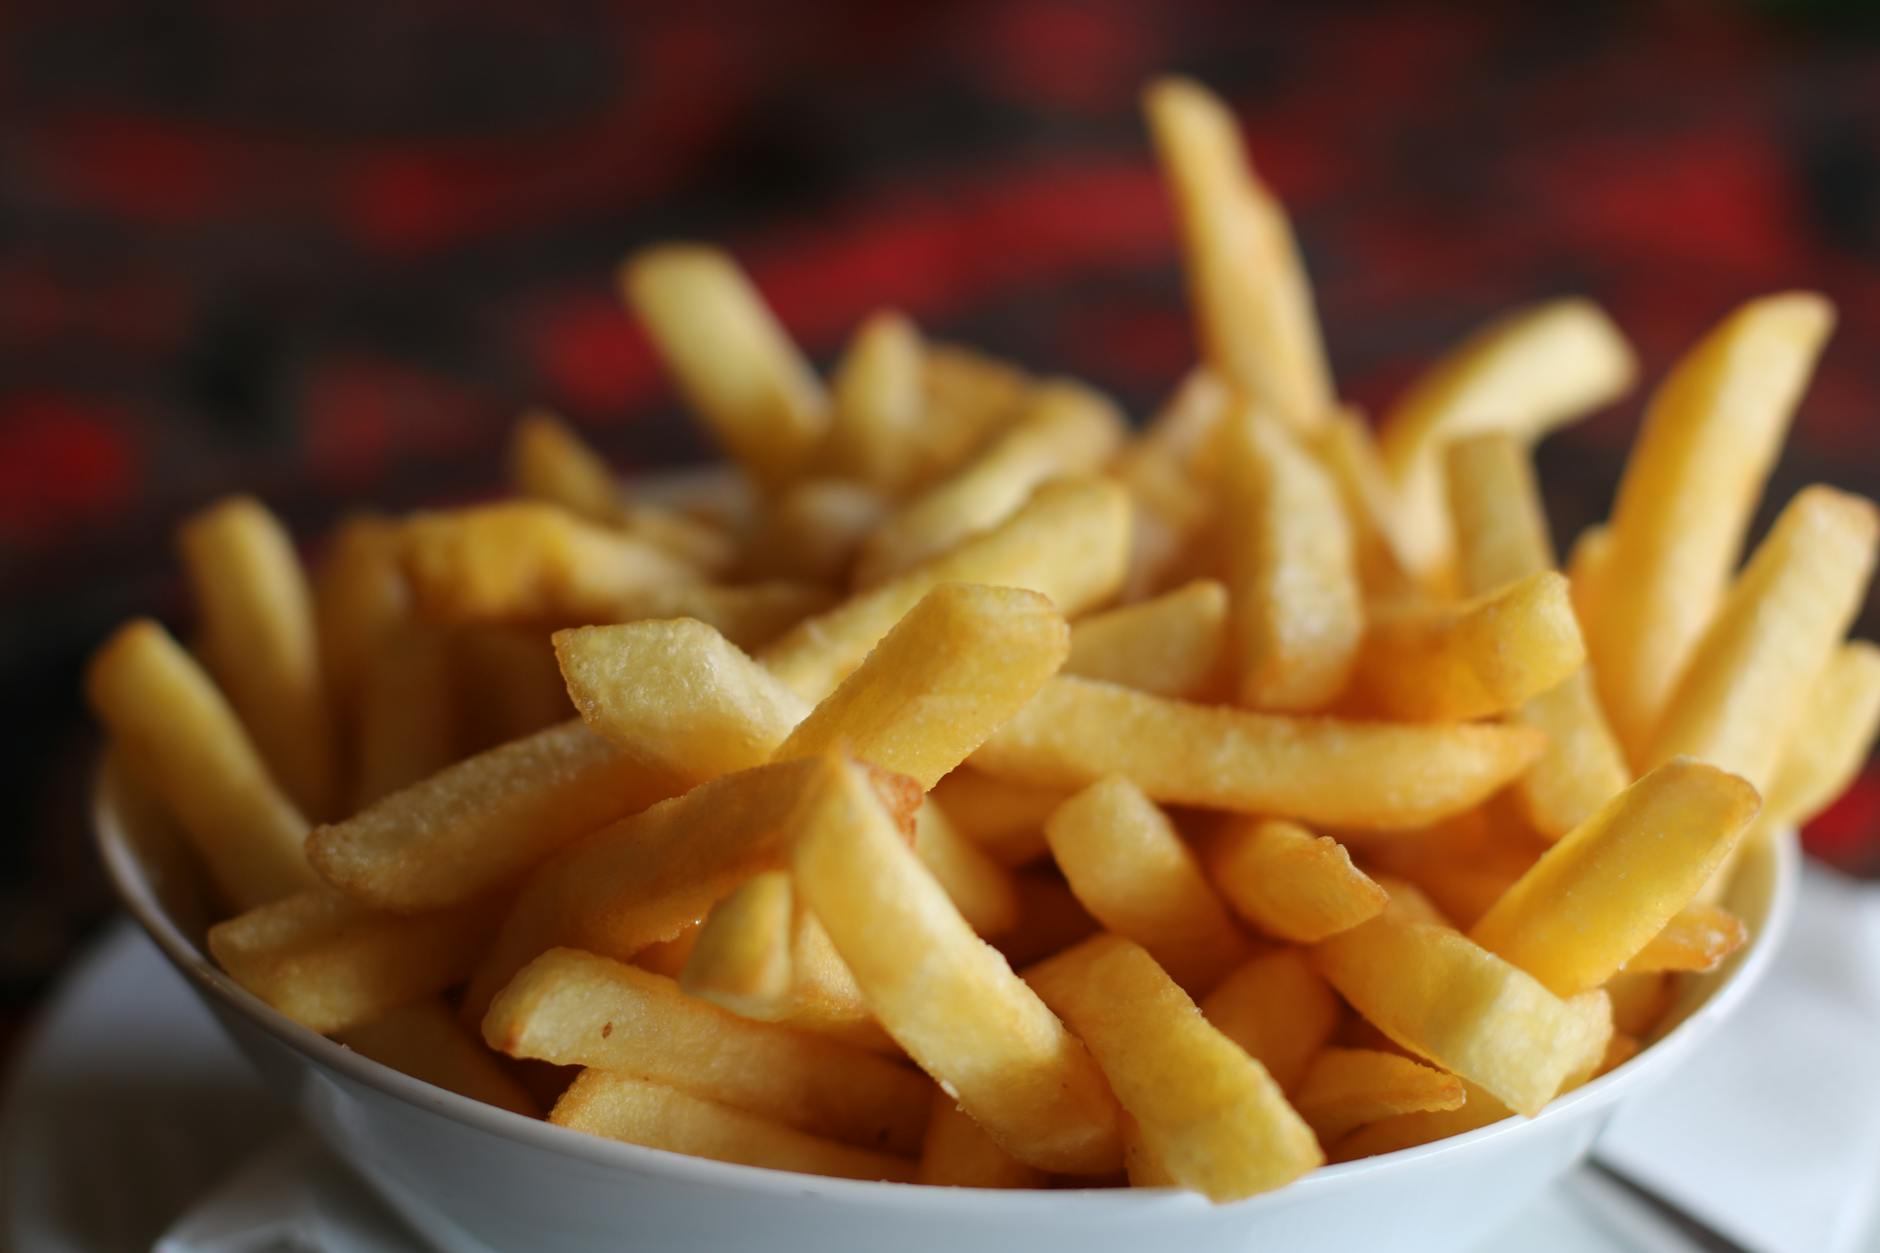 Determining the Right Oil Temperature for Perfectly Fried Potato Fries